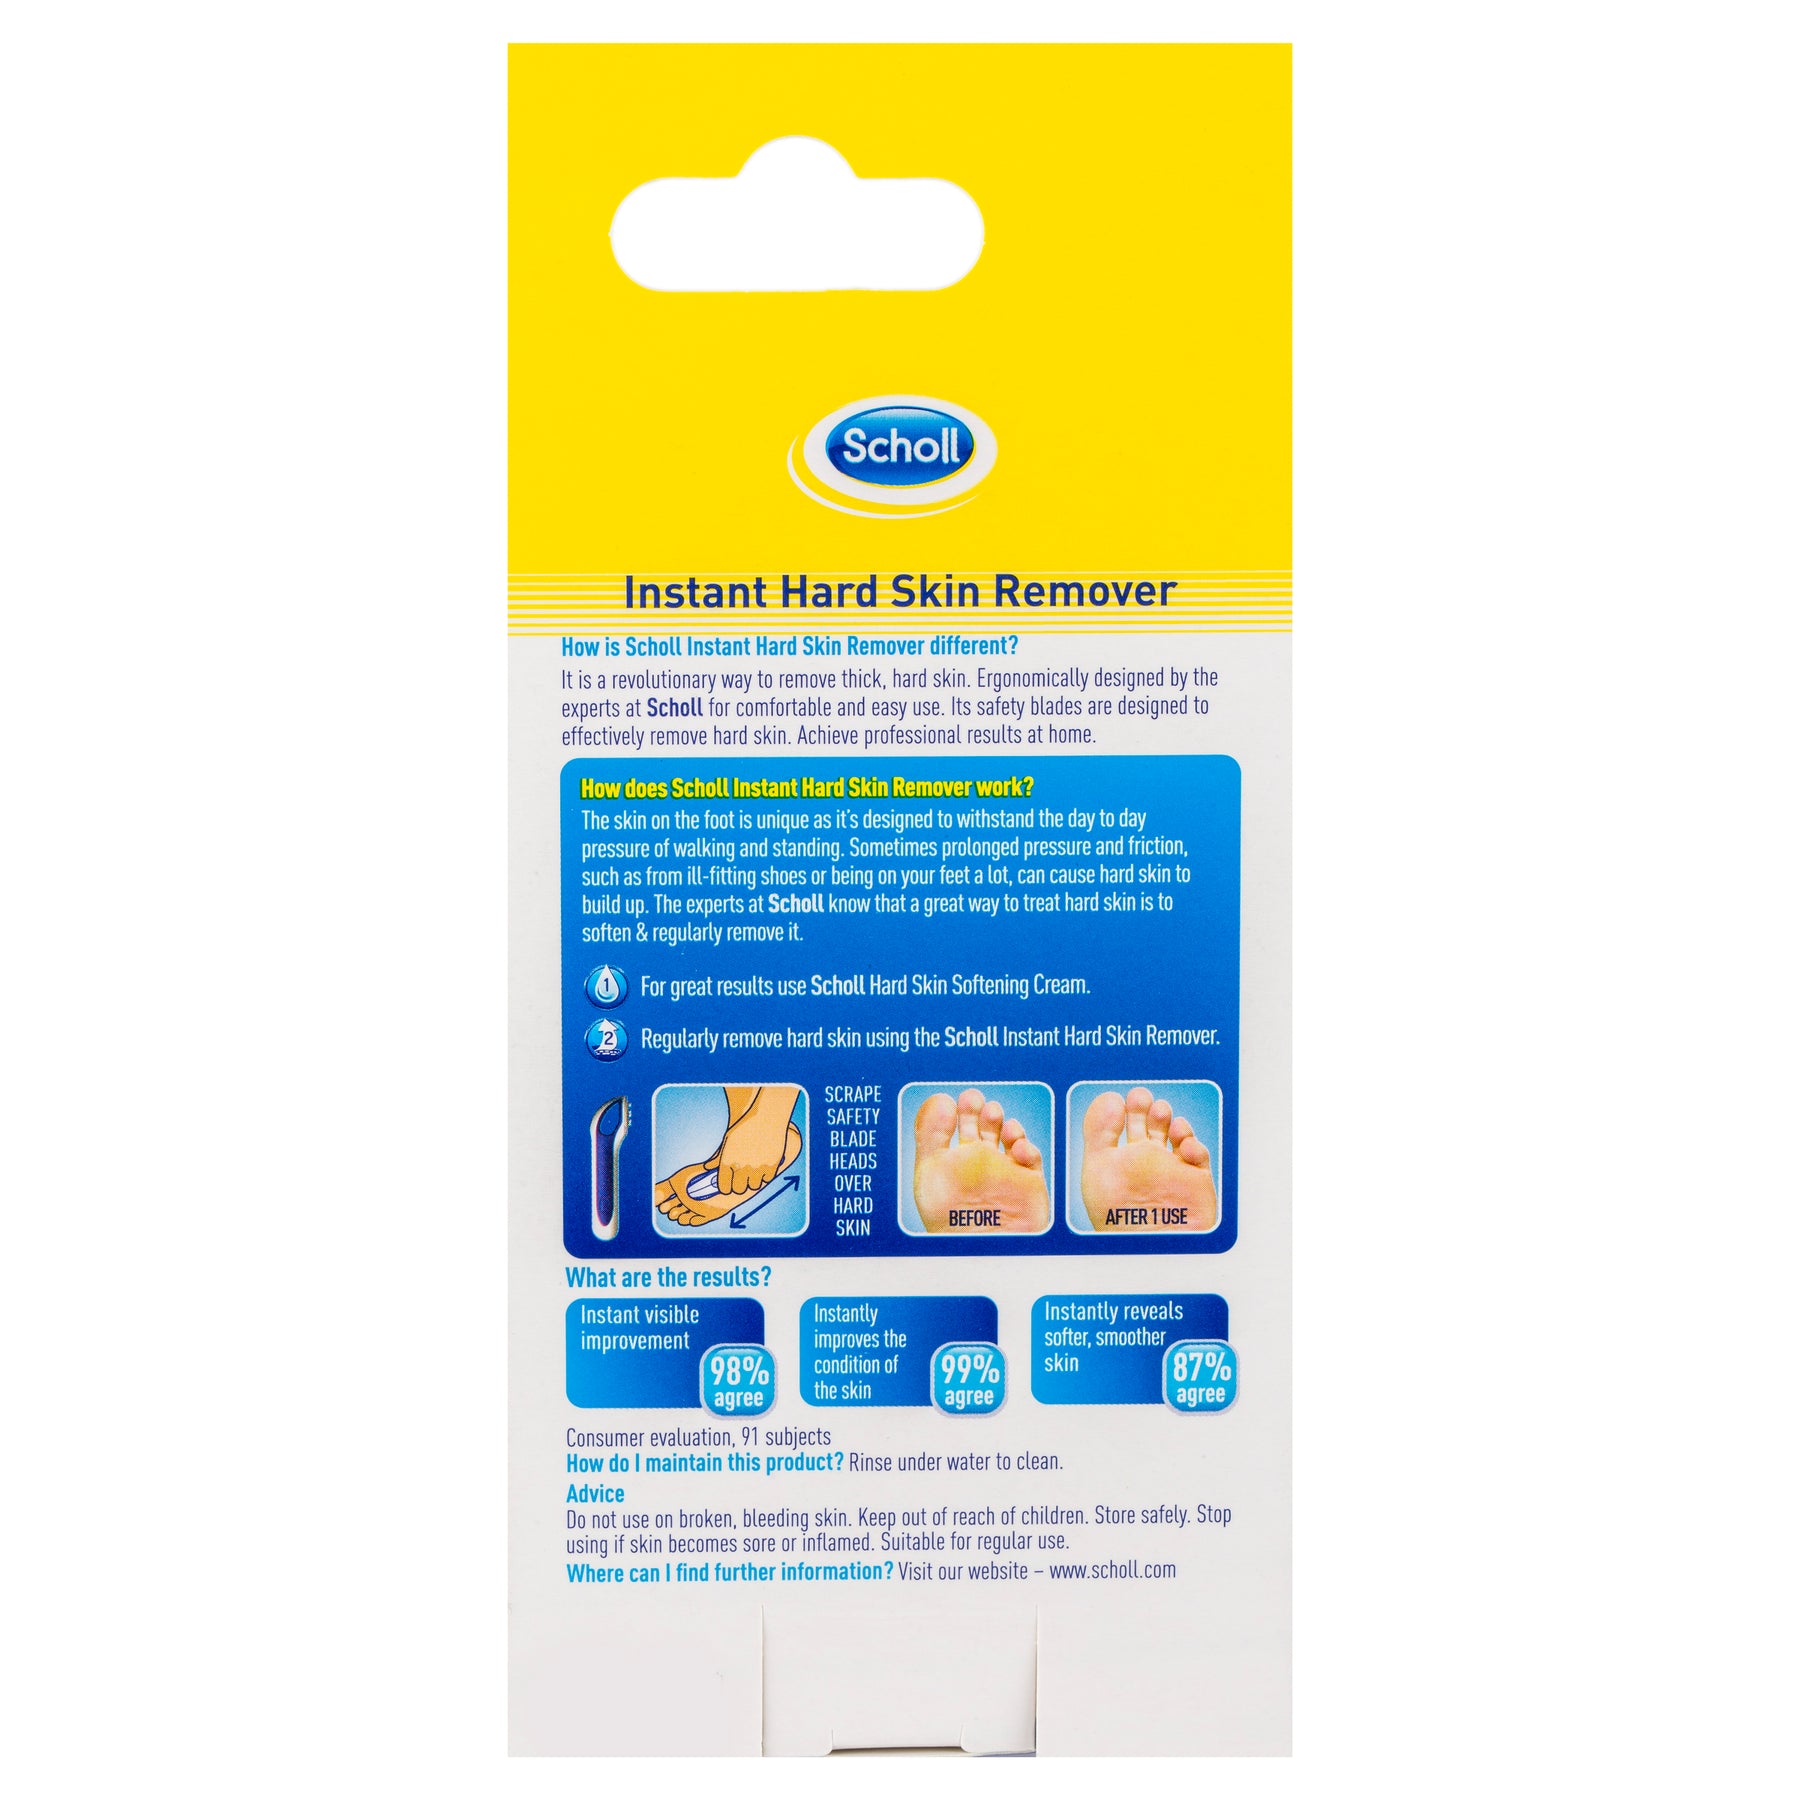 Instant Hard Skin Remover - Scholl - Pink